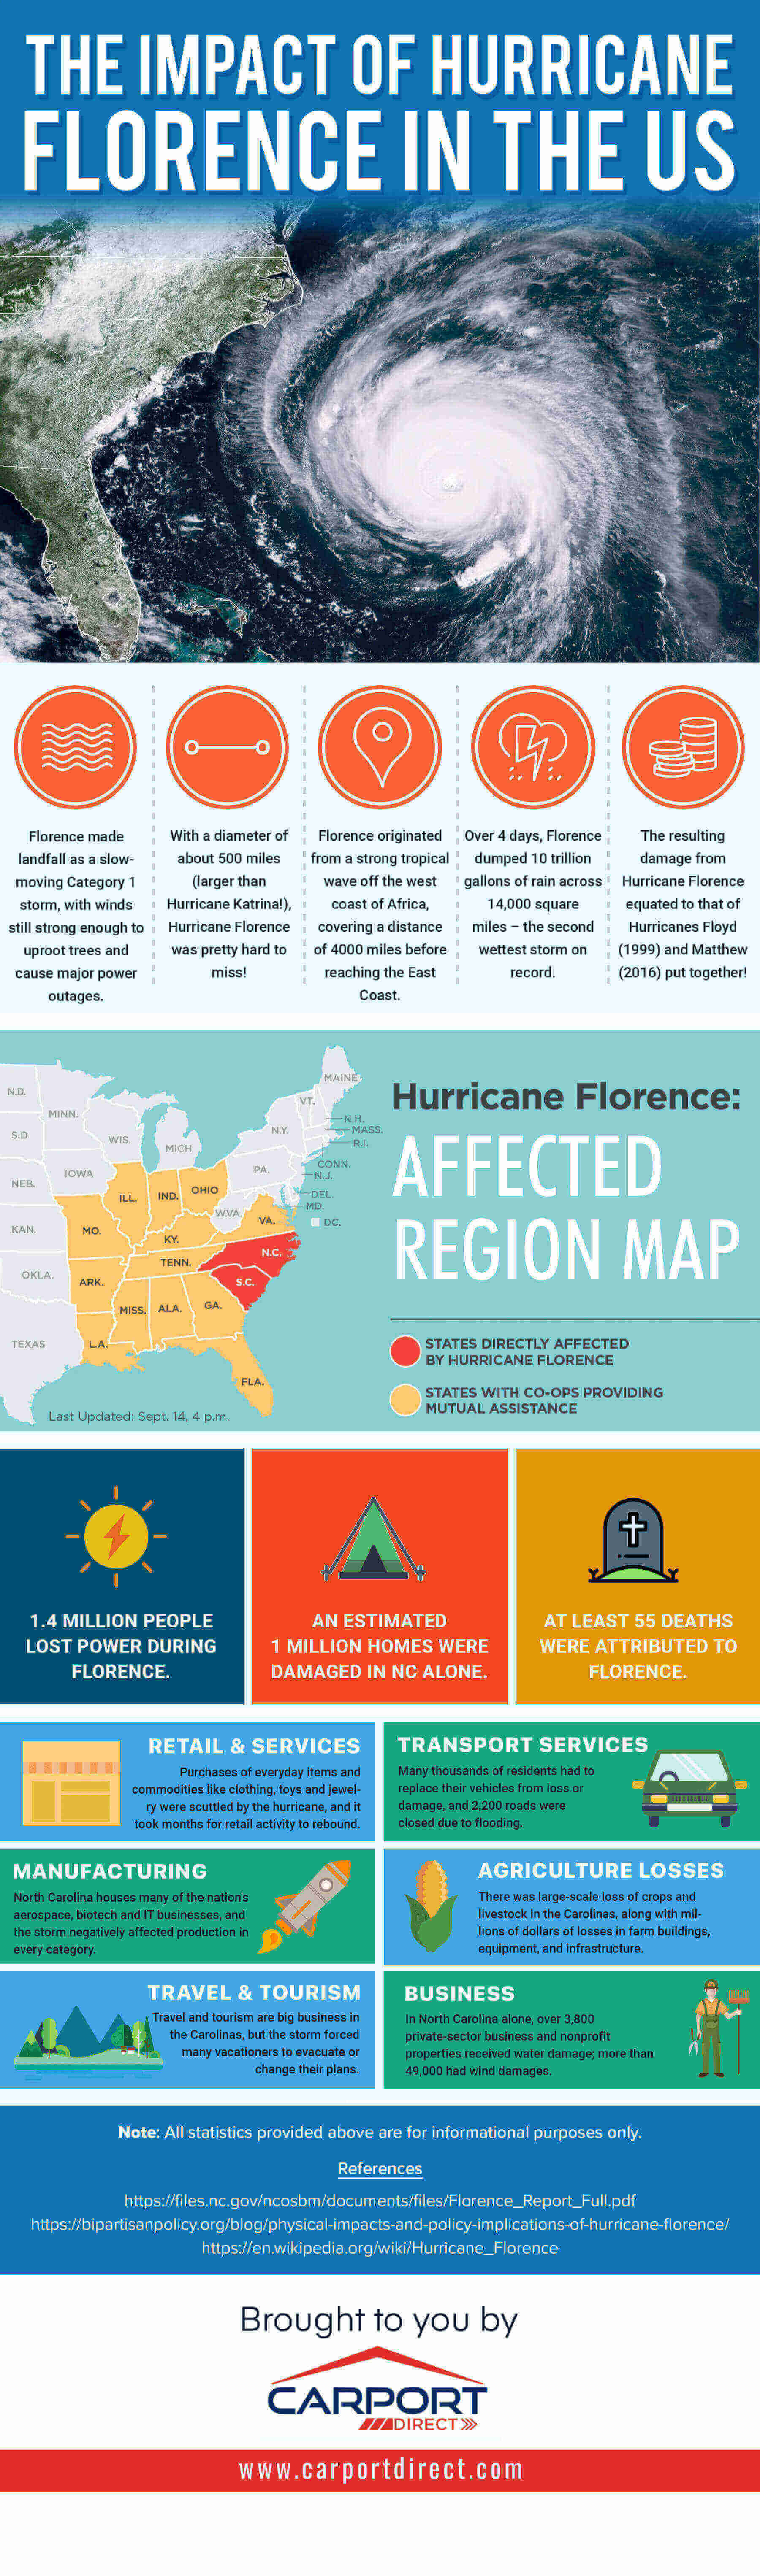 Impact of Hurricane Florence in the US